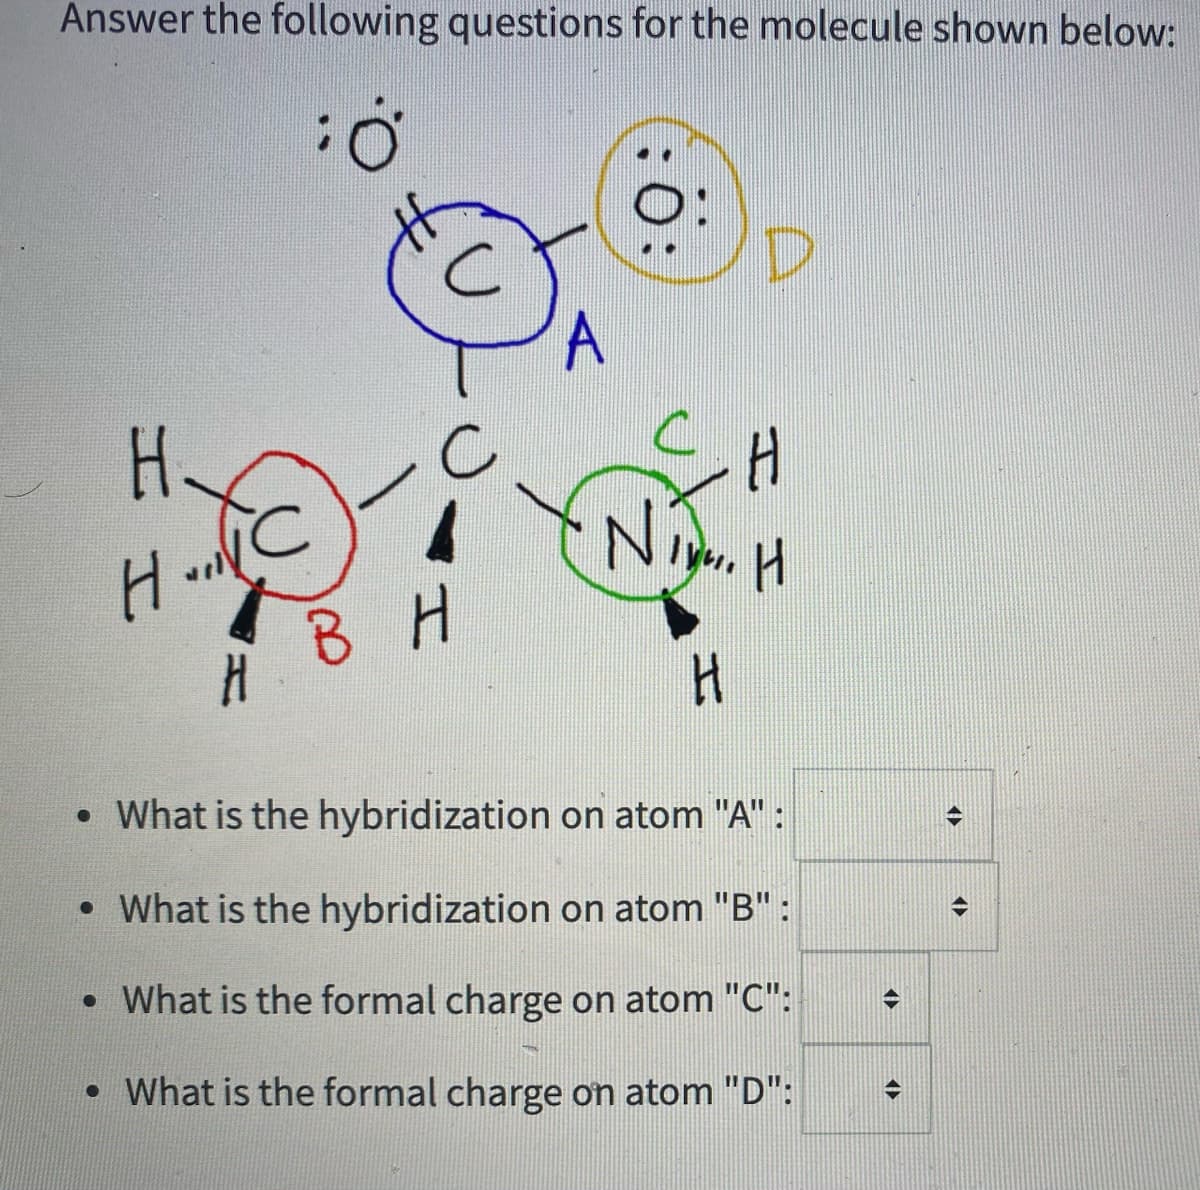 Answer the following questions for the molecule shown below:
A
H.
В Н
• What is the hybridization on atom "A" :
• What is the hybridization on atom "B" :
• What is the formal charge on atom "C":
• What is the formal charge on atom "D":
